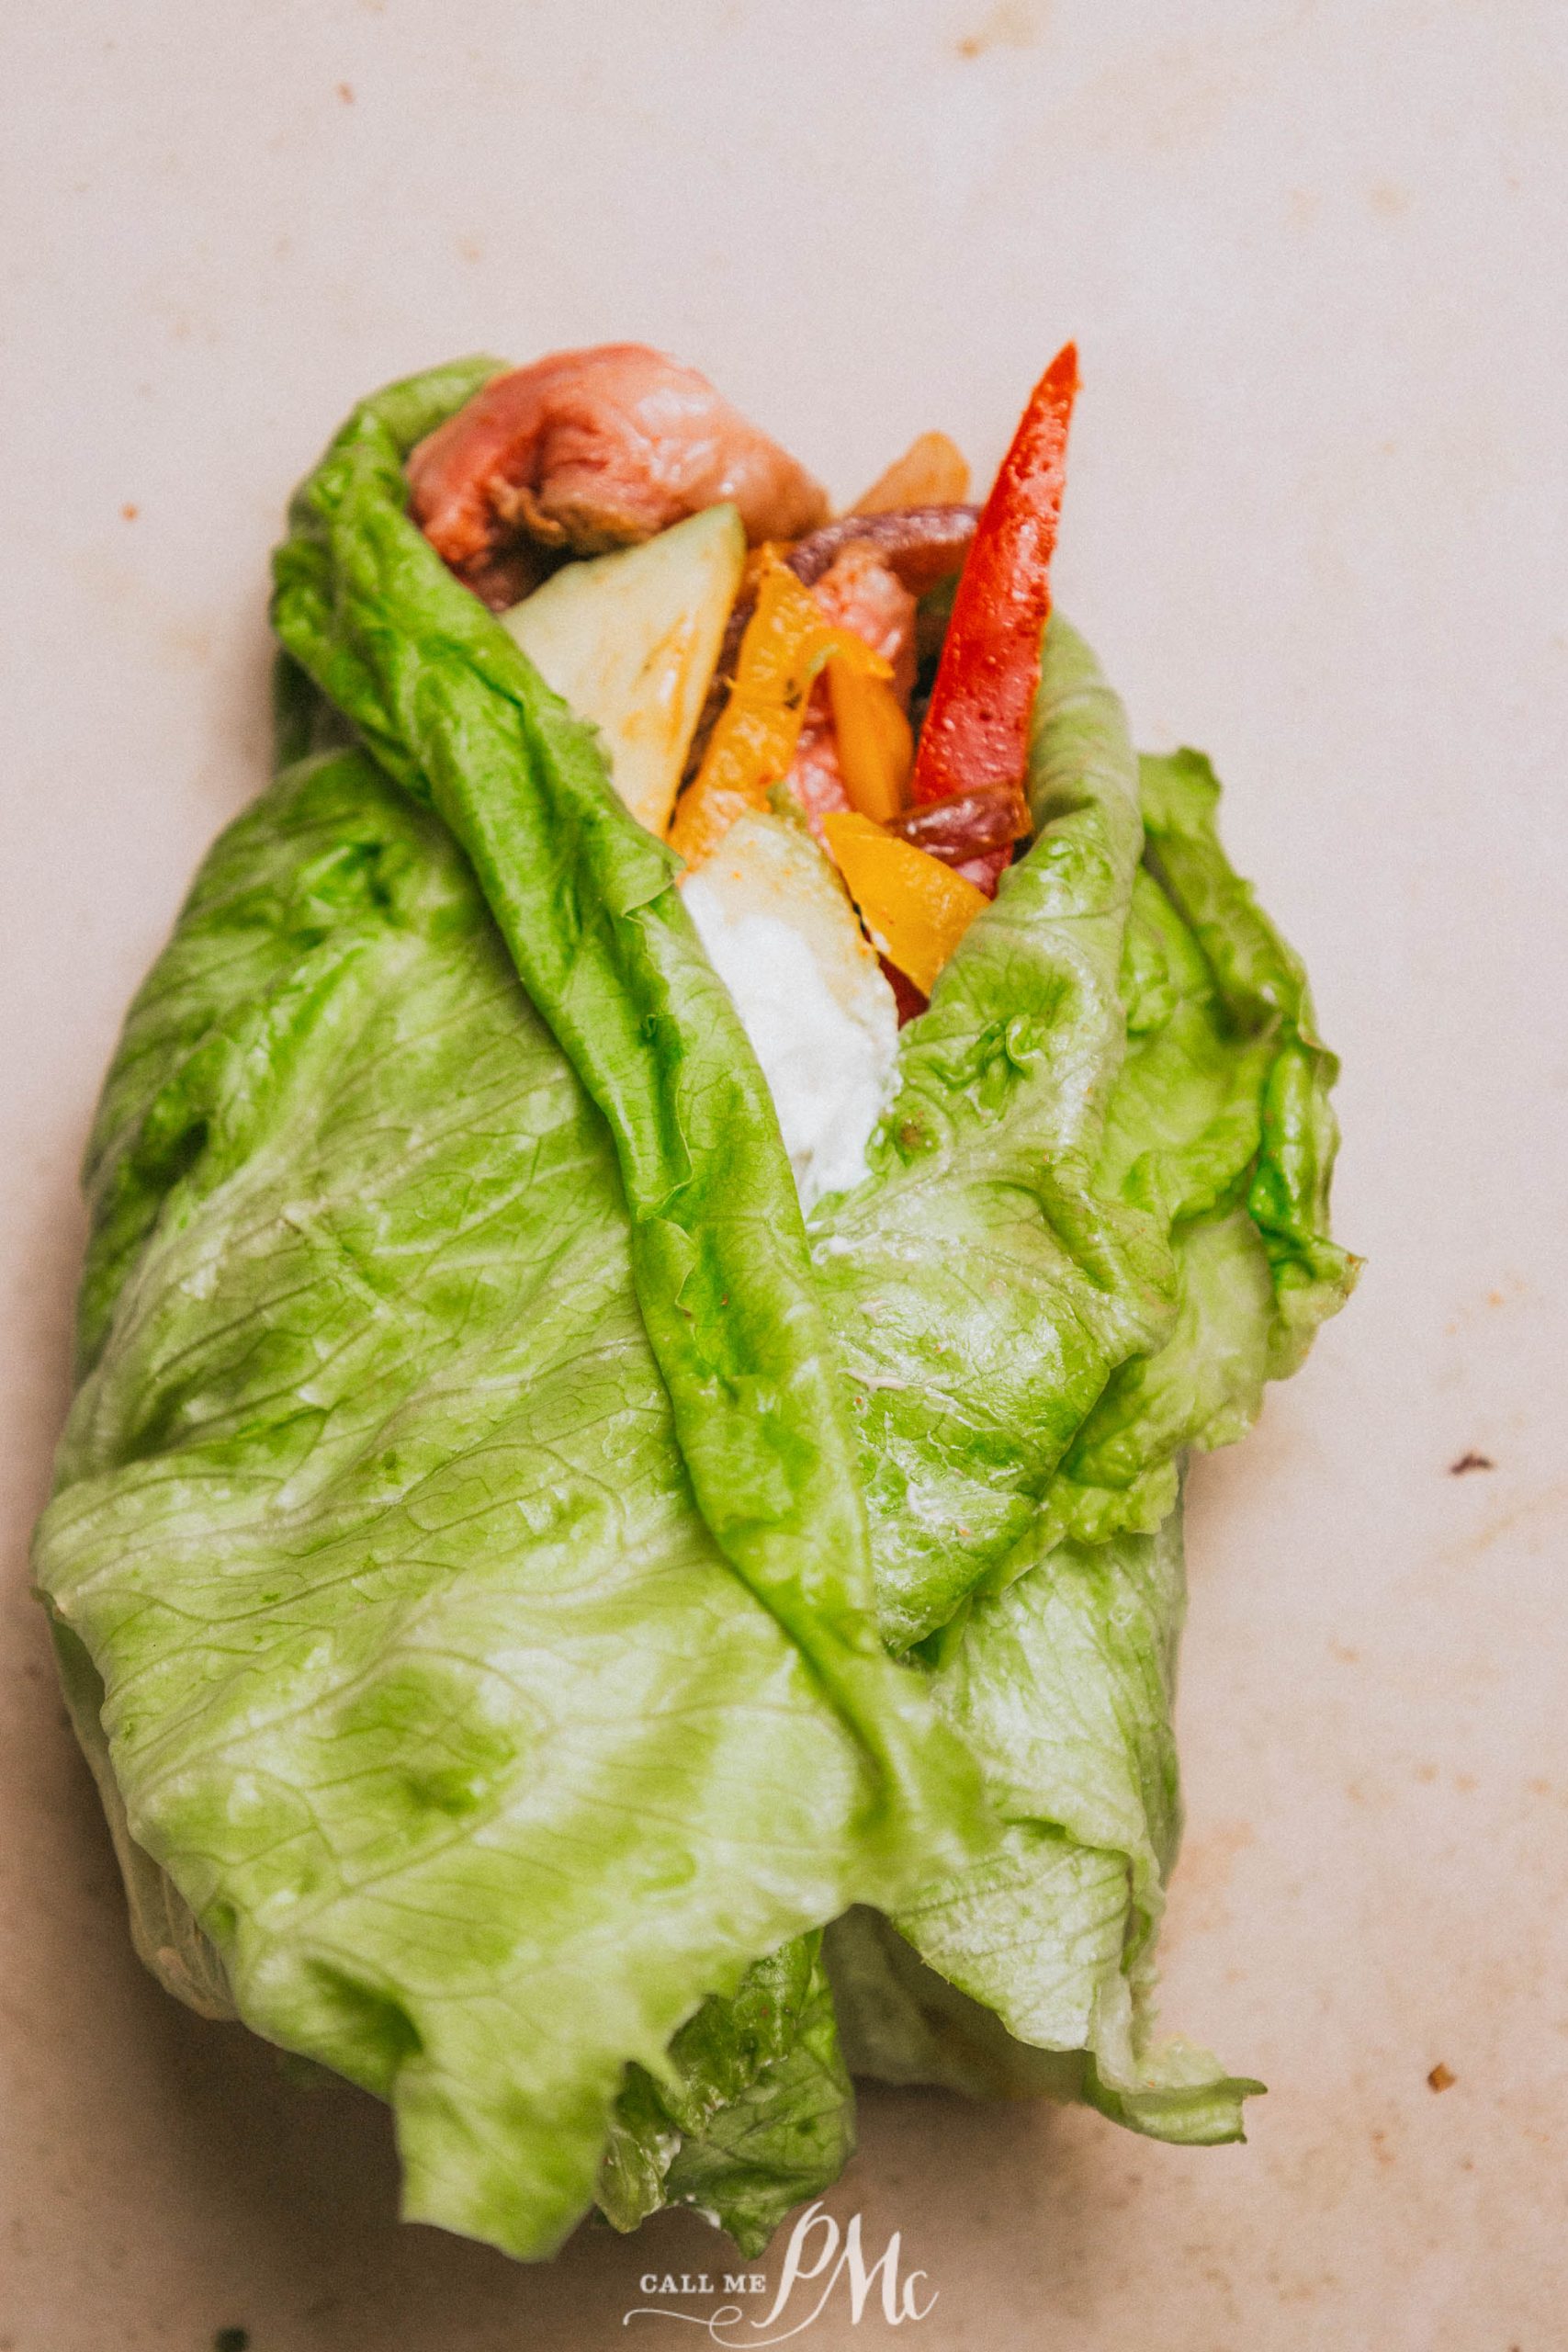 A lettuce wrap filled with vegetables and meat.